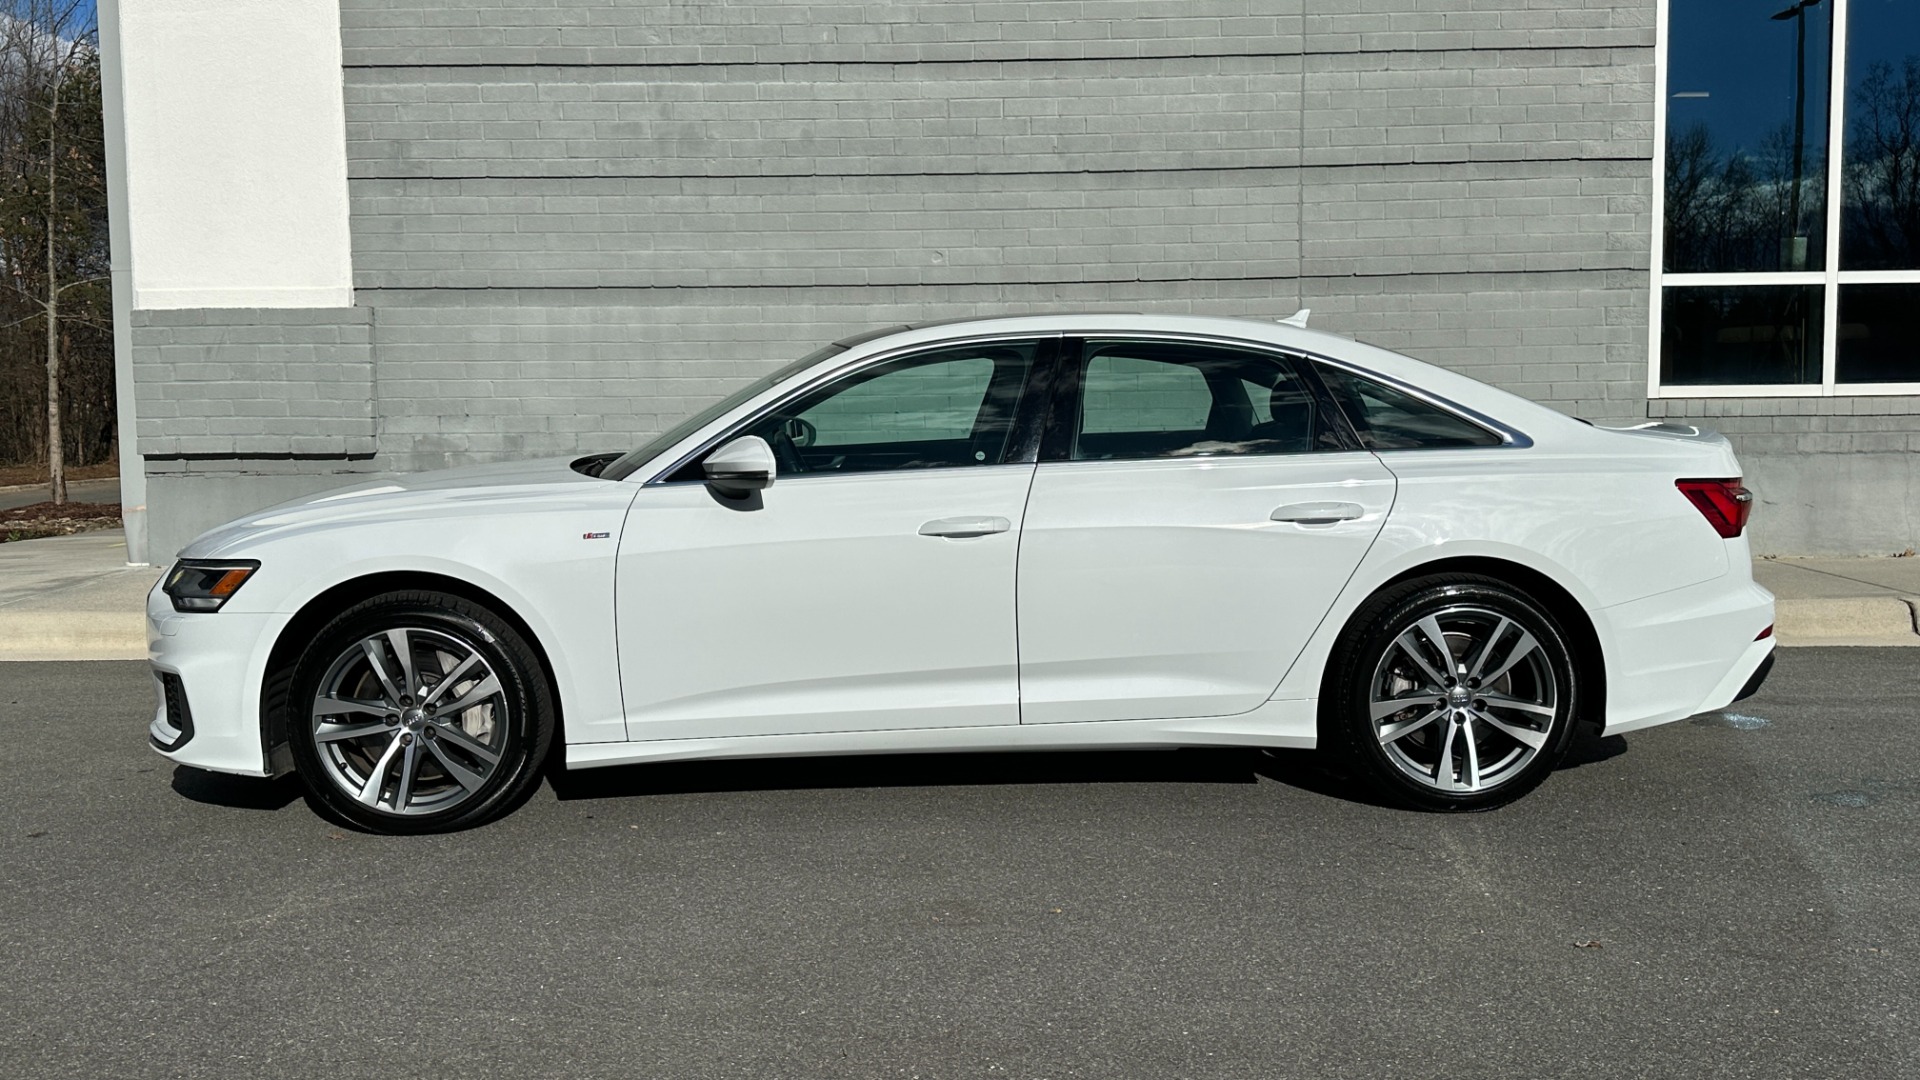 Used 2019 Audi A6 PREMIUM / COLD WEATHER PKG / CONVENIENCE PKG / INTERIOR PROTECTION PKG for sale $36,995 at Formula Imports in Charlotte NC 28227 3